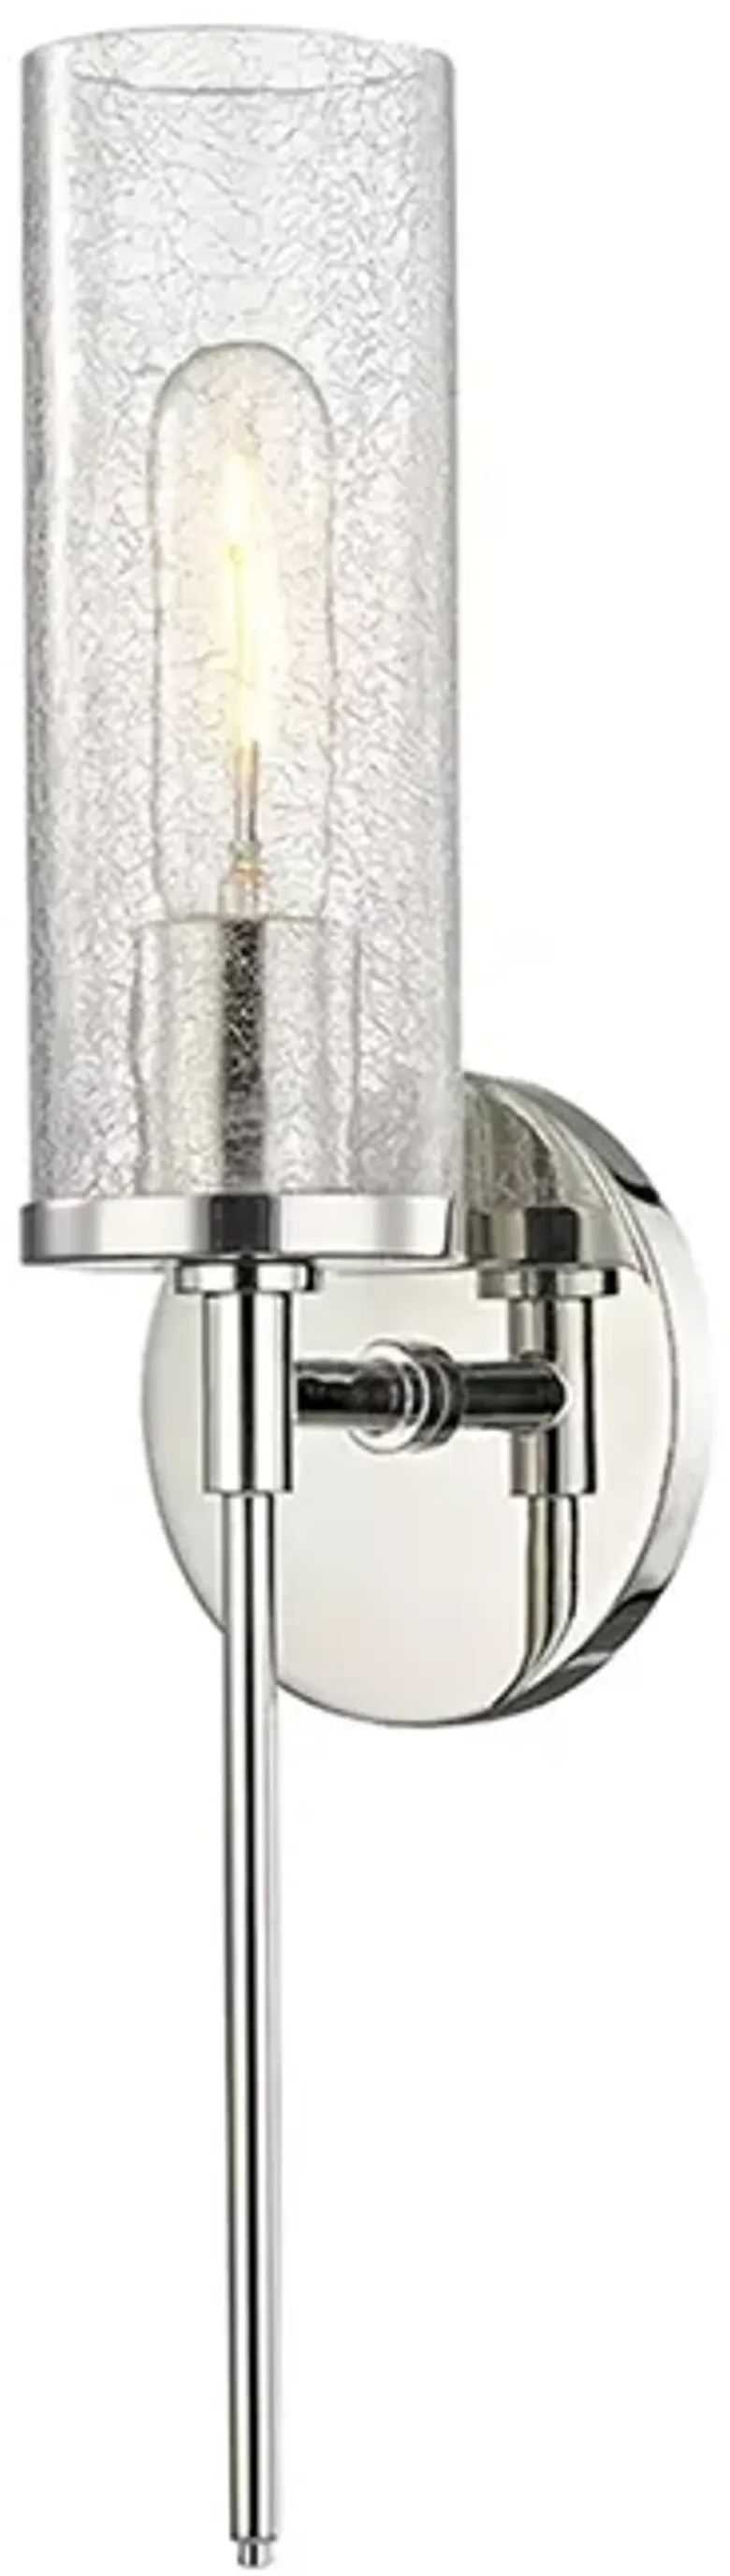 Hudson Valley Olivia Wall Sconce